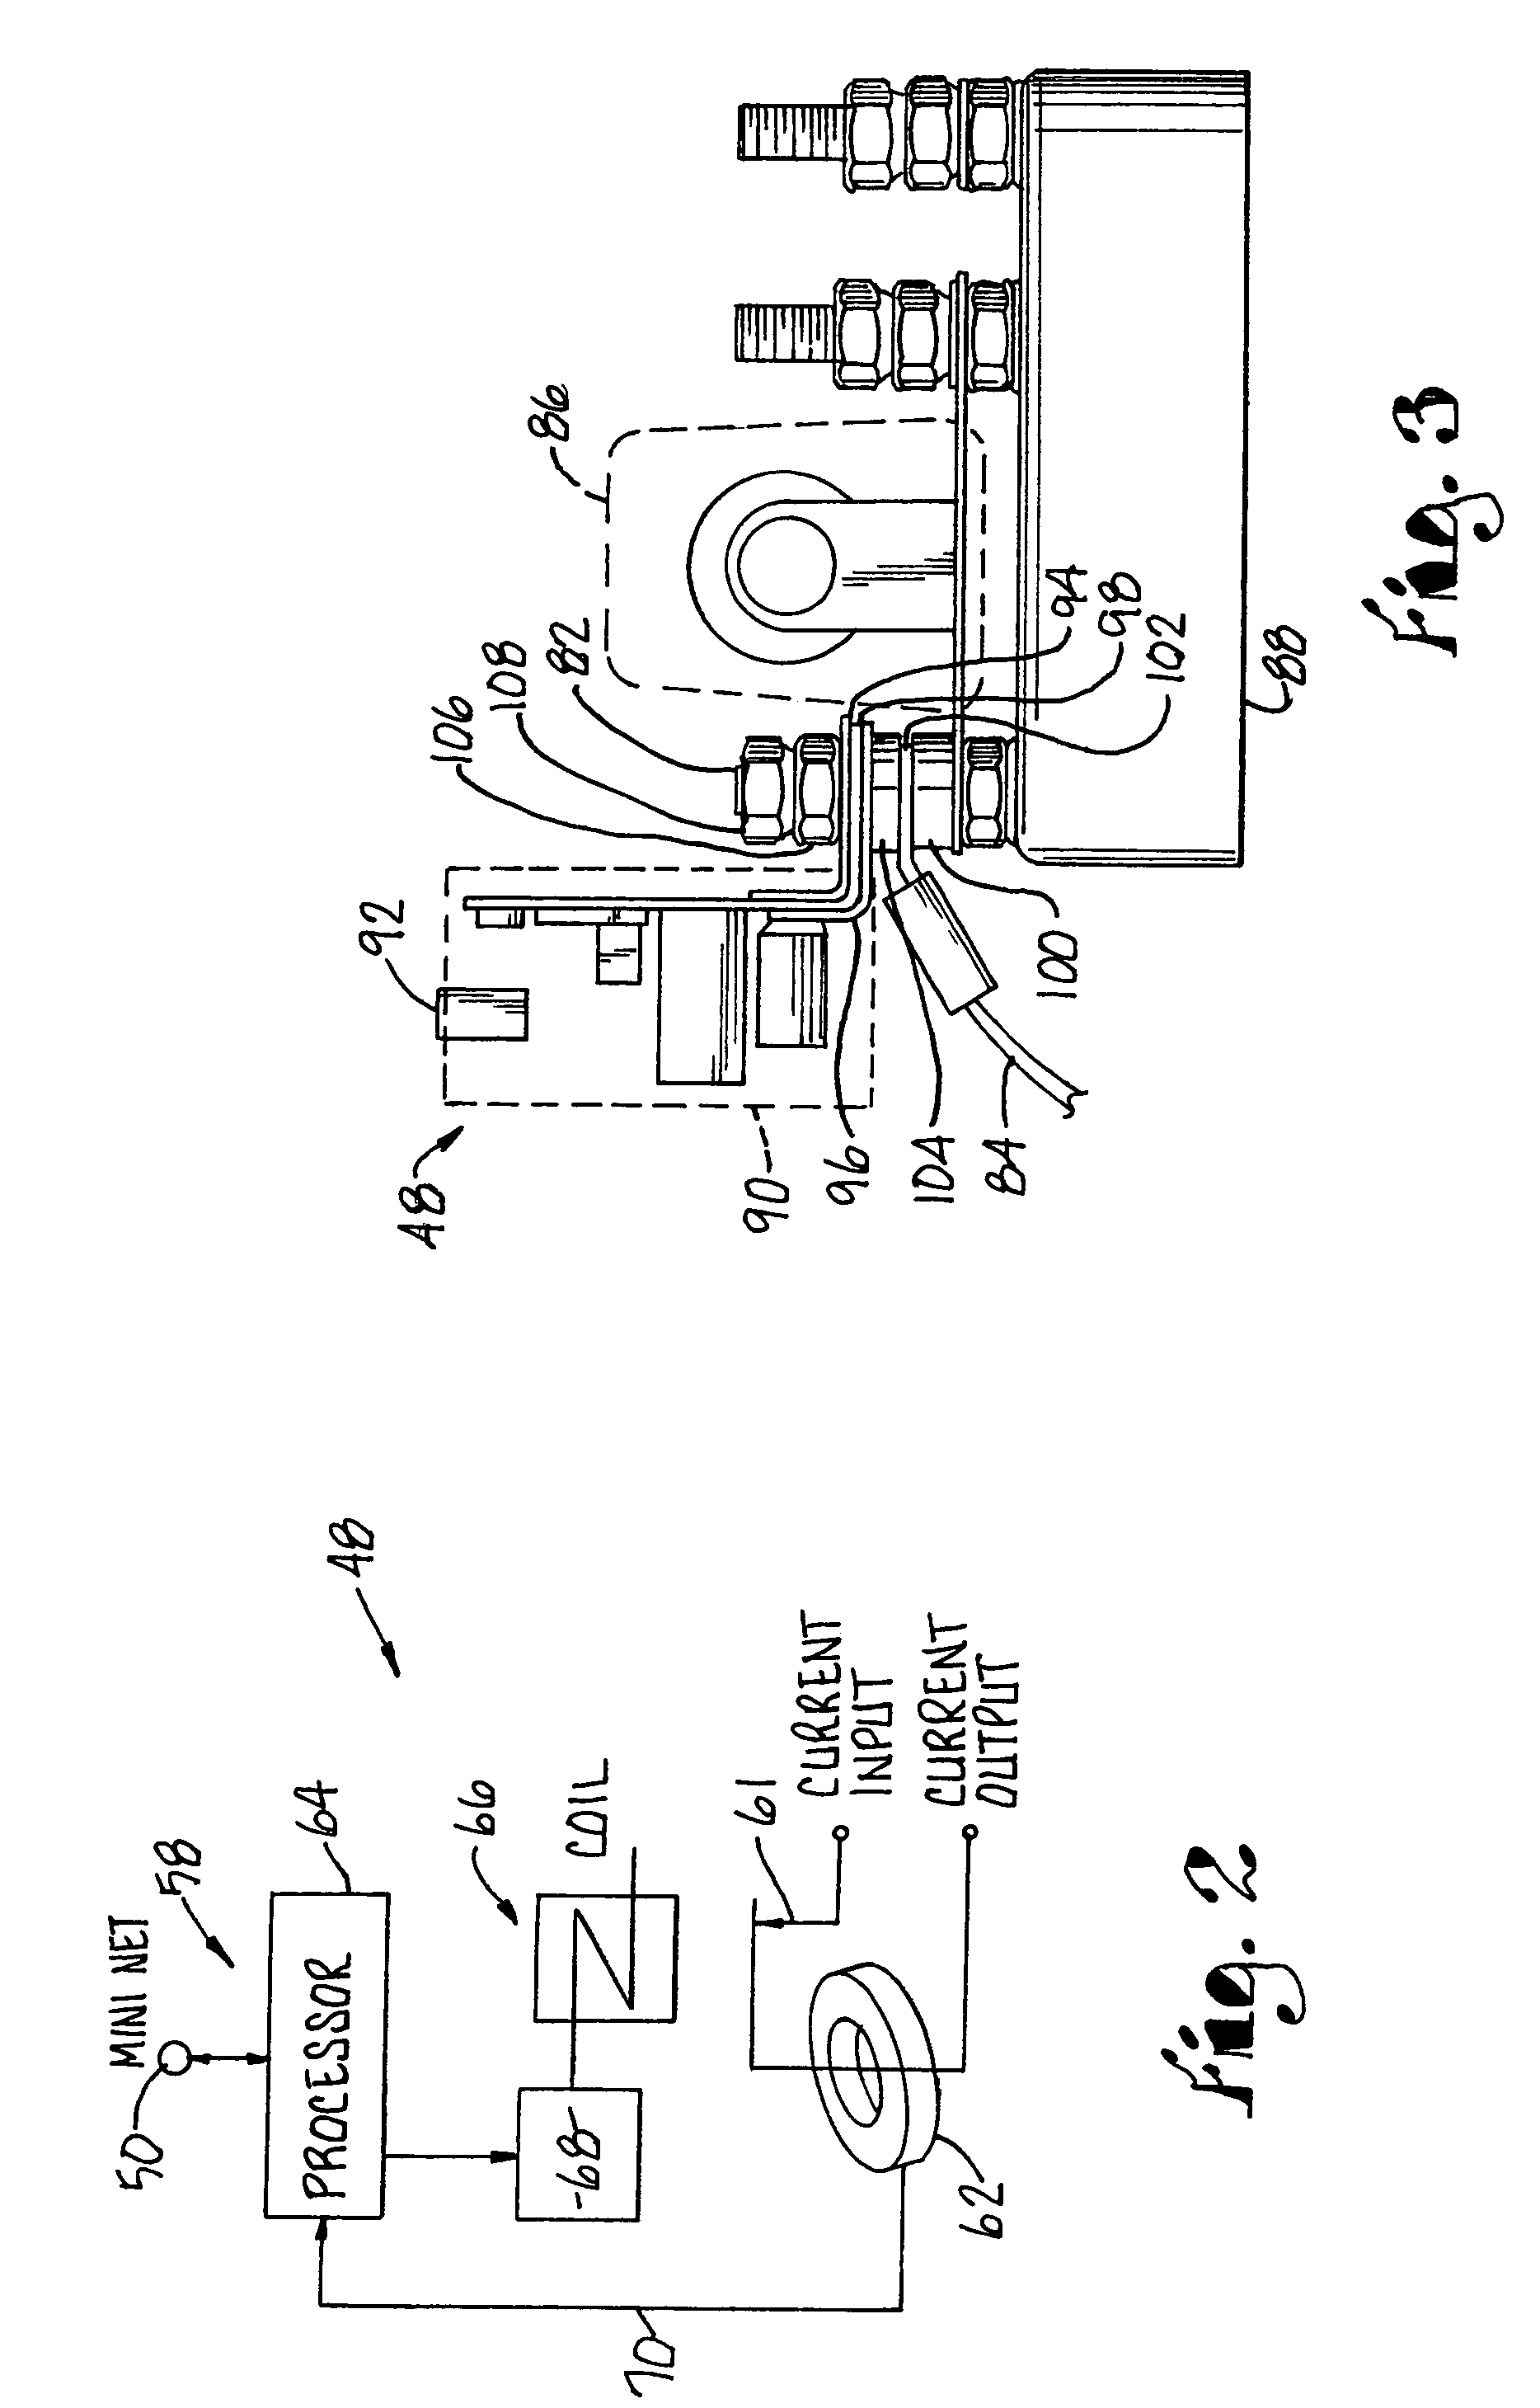 Method and apparatus for automatically testing a railroad interlocking